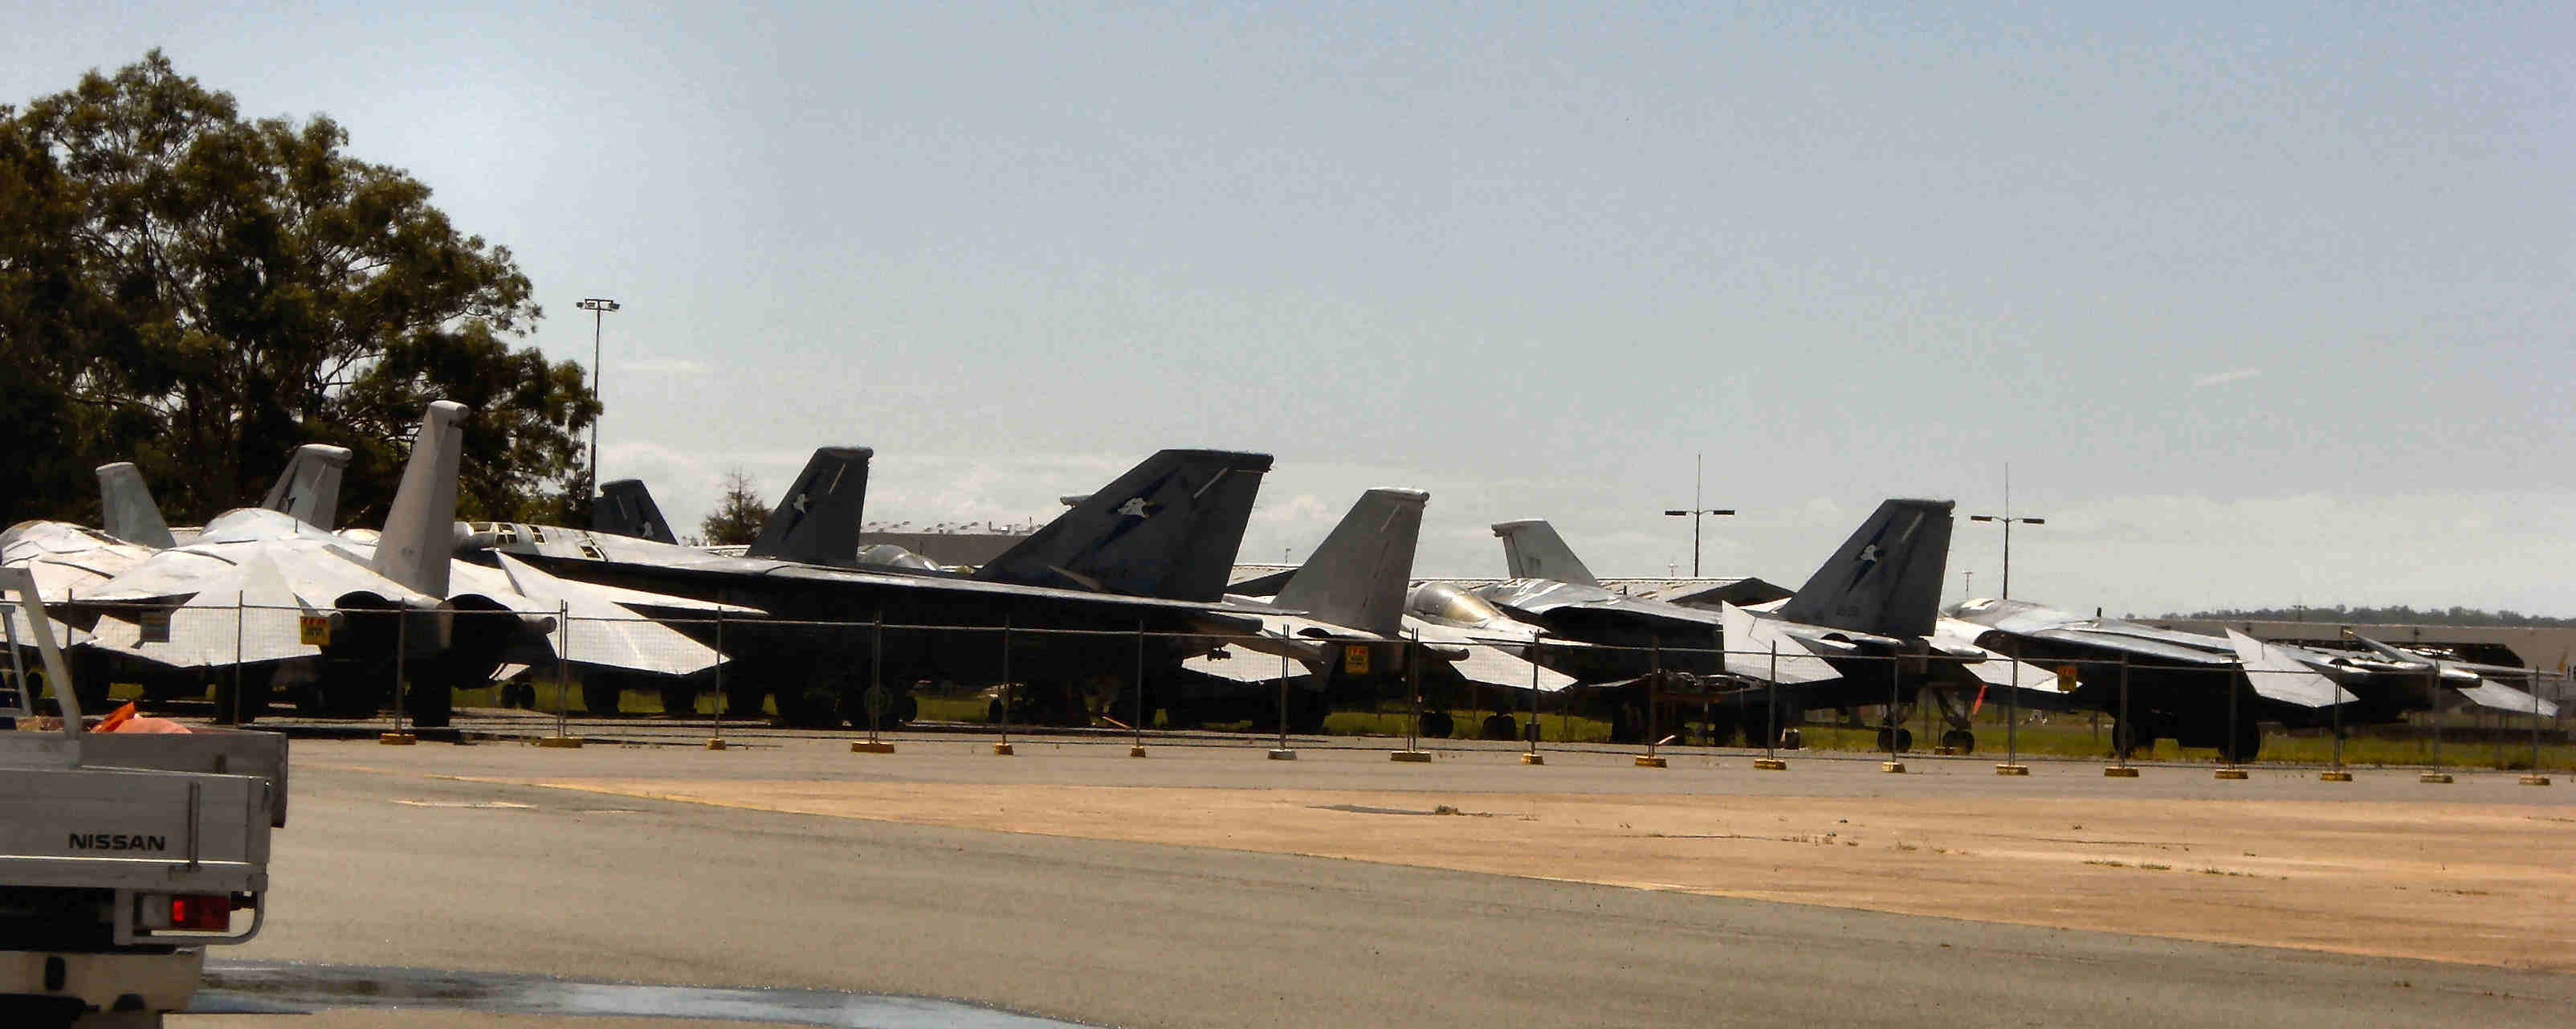 "Discarded F111's at Amberley, Nov 2009